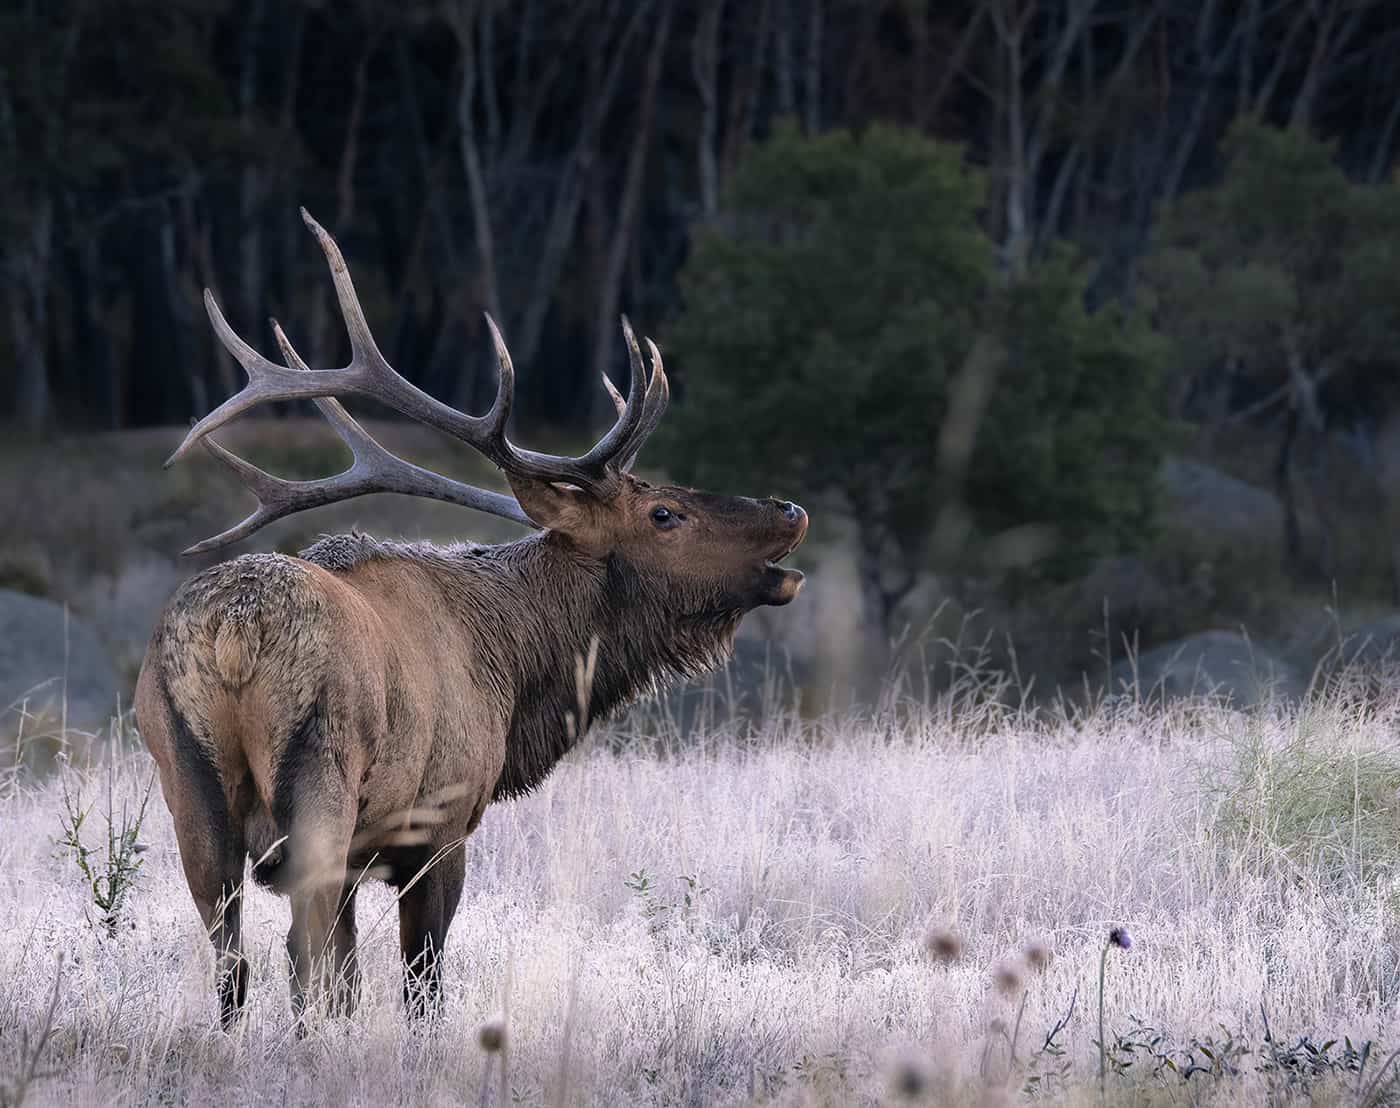 Bull elk on a frosty morning in Rocky Mountain National Park